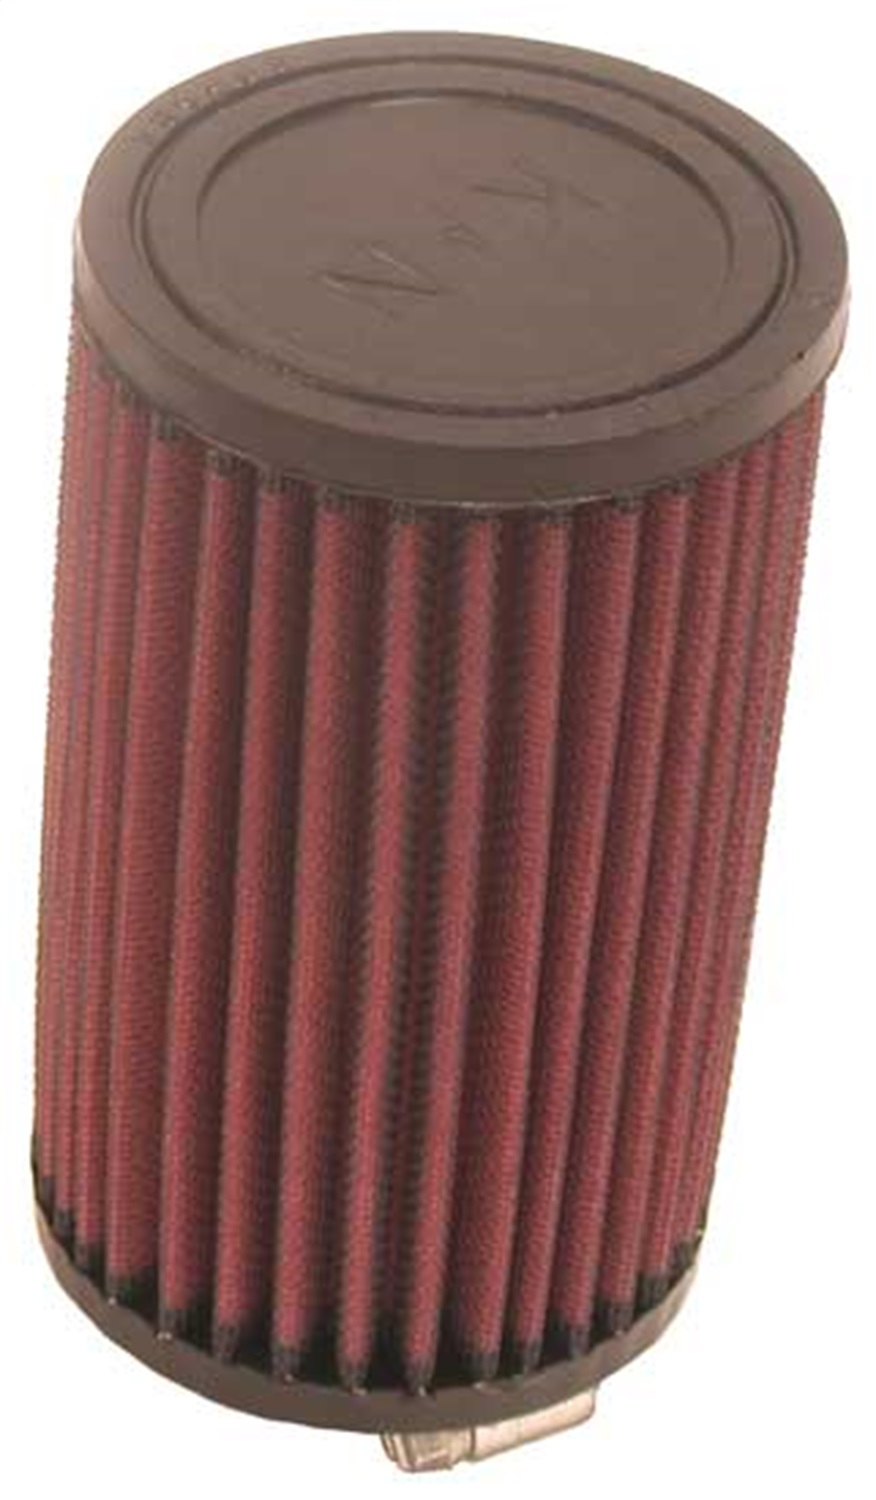 K&N Filters K&N Filters R-1050 Universal Air Cleaner Assembly